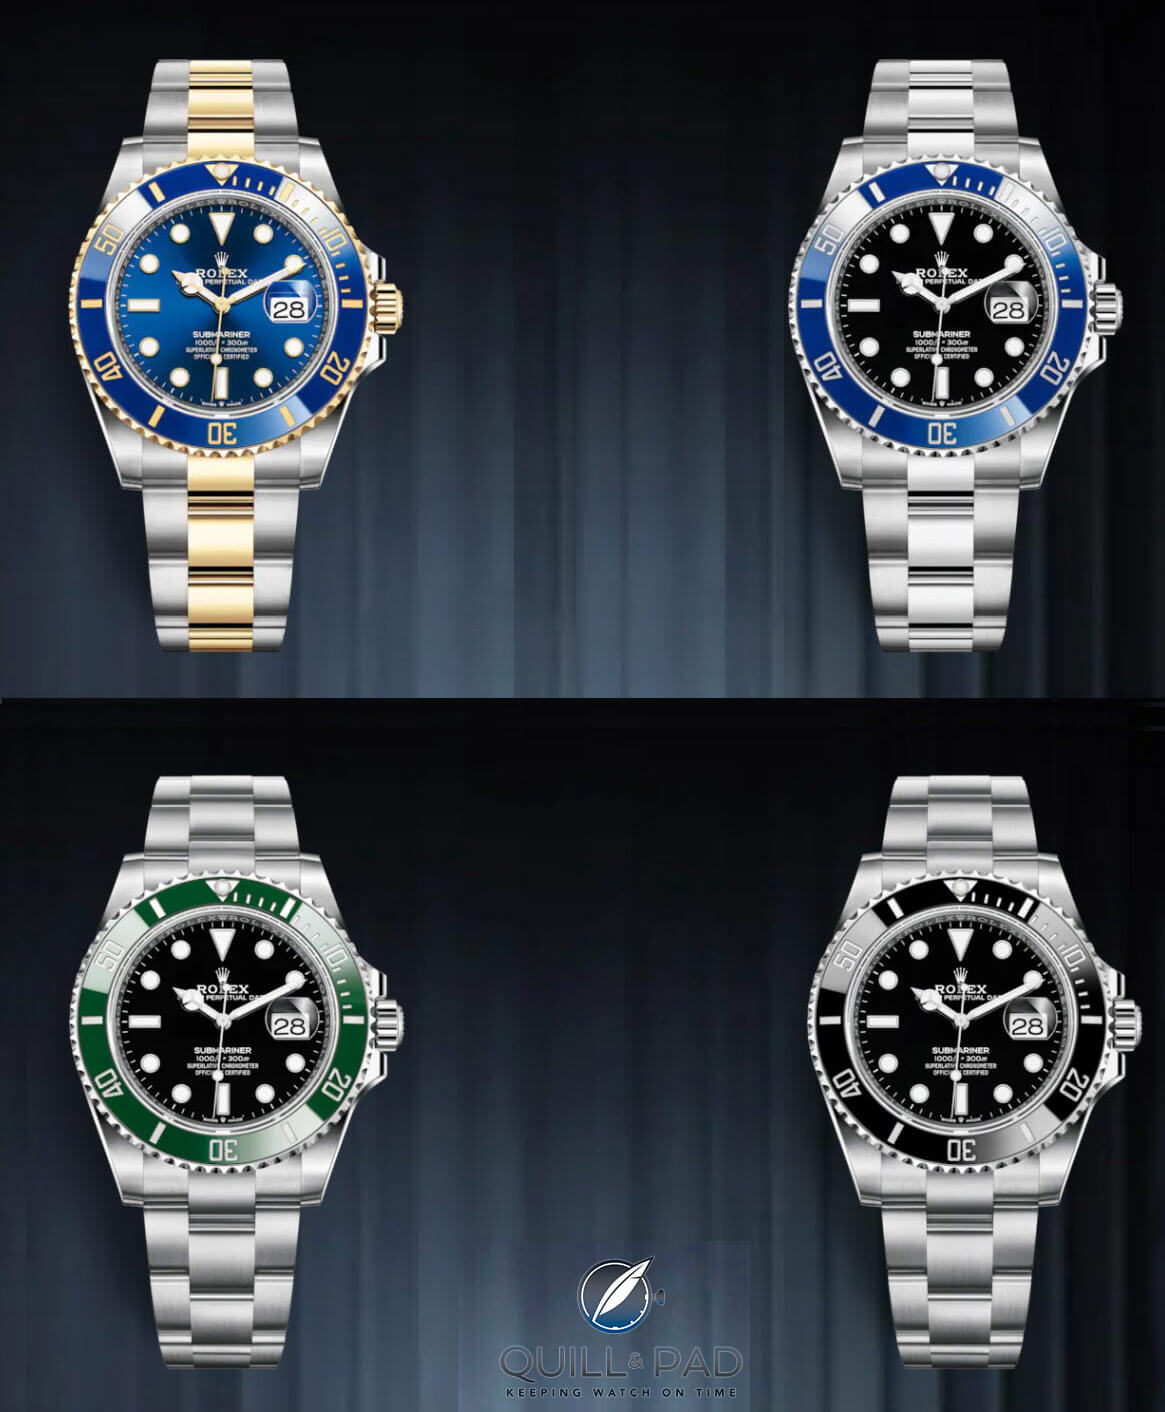 Tidlig befolkning gå på pension All 4 New Rolex 2020 Collection Updates Plus One Watch You Might Have  Missed - Quill & Pad